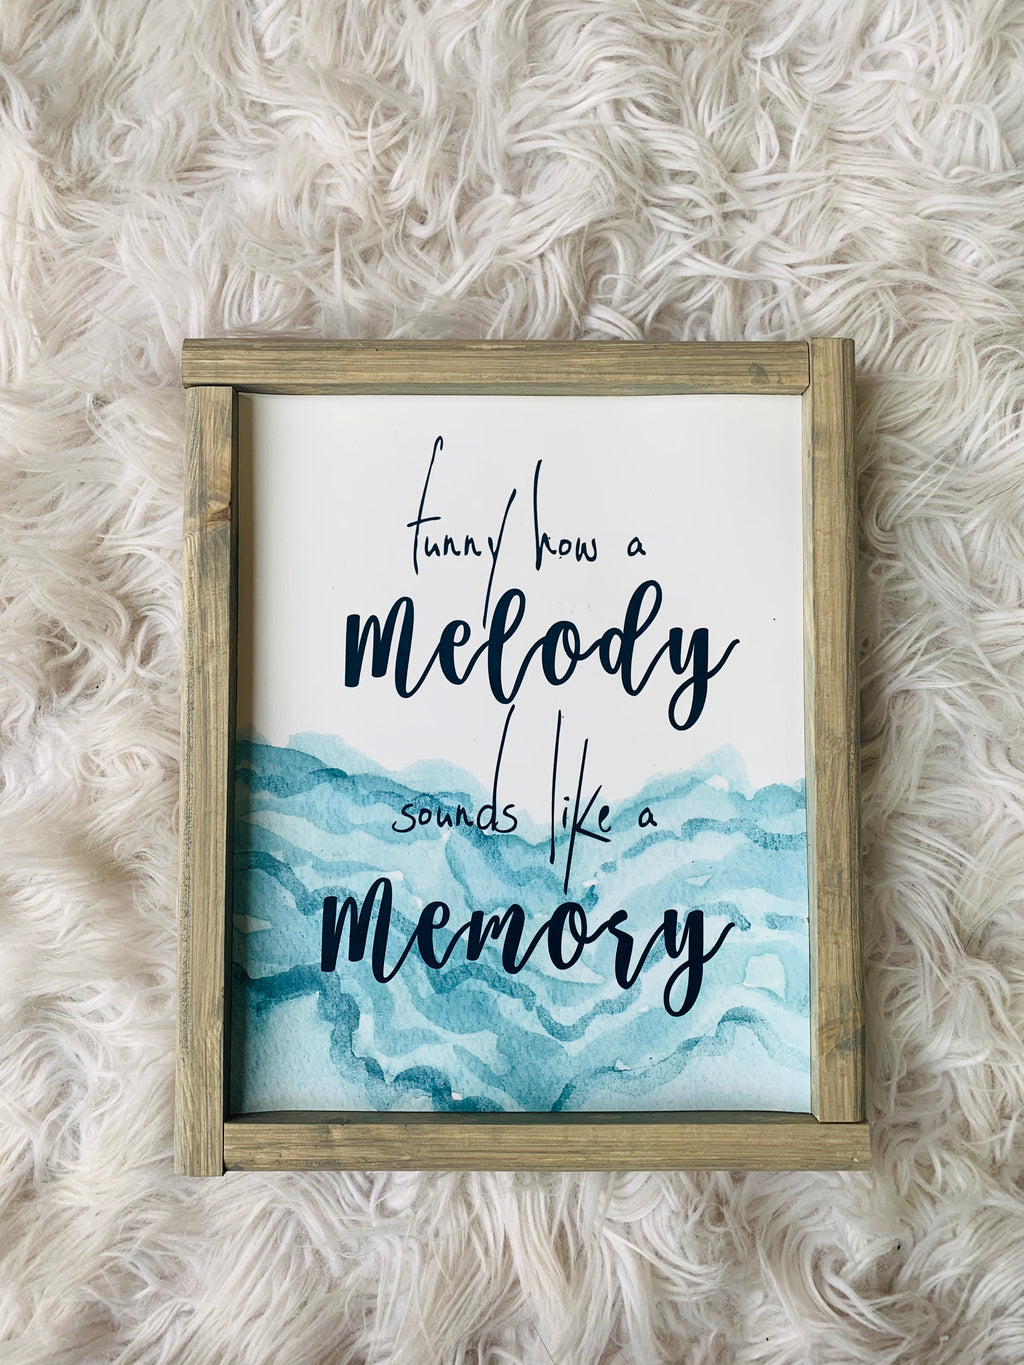 Funny How A Melody Sounds Like A Memory